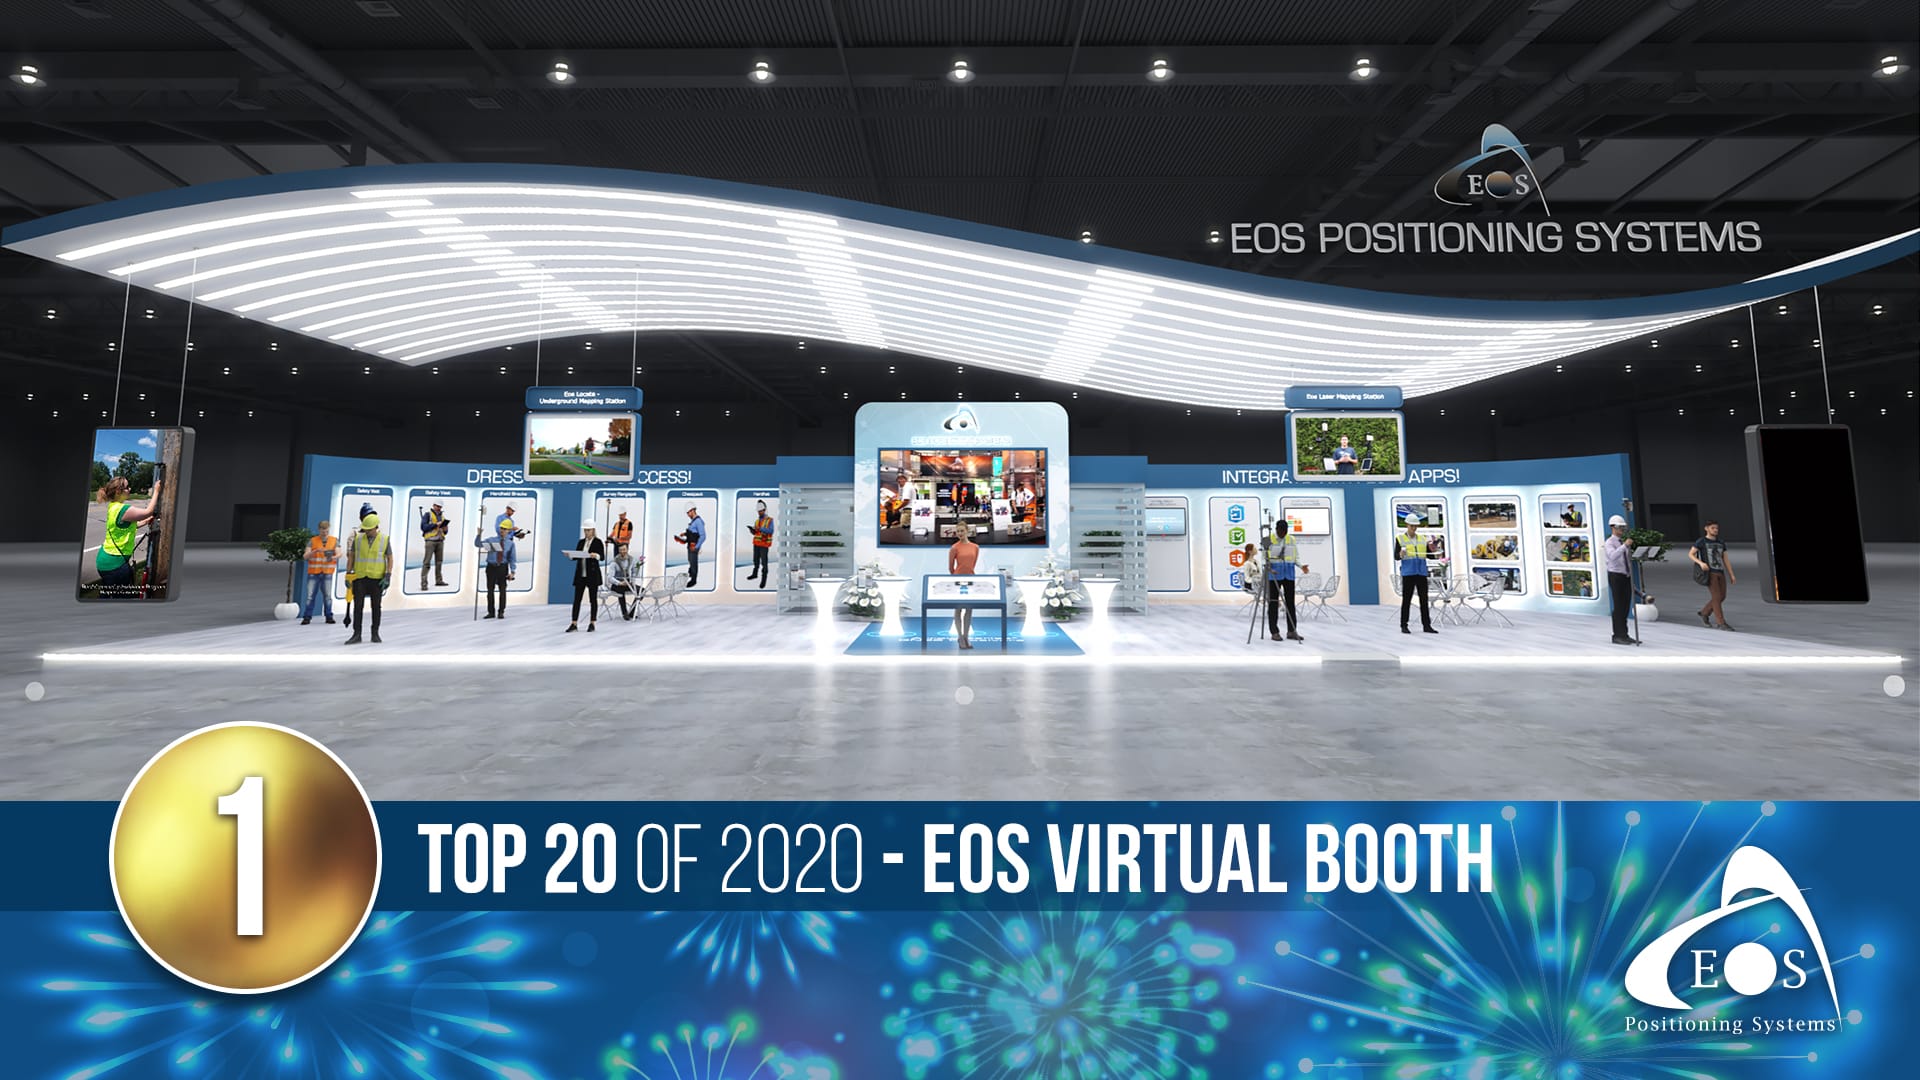 Eos Positioning Systems blog top articles of 2020: 1 - Eos Virtual Booth